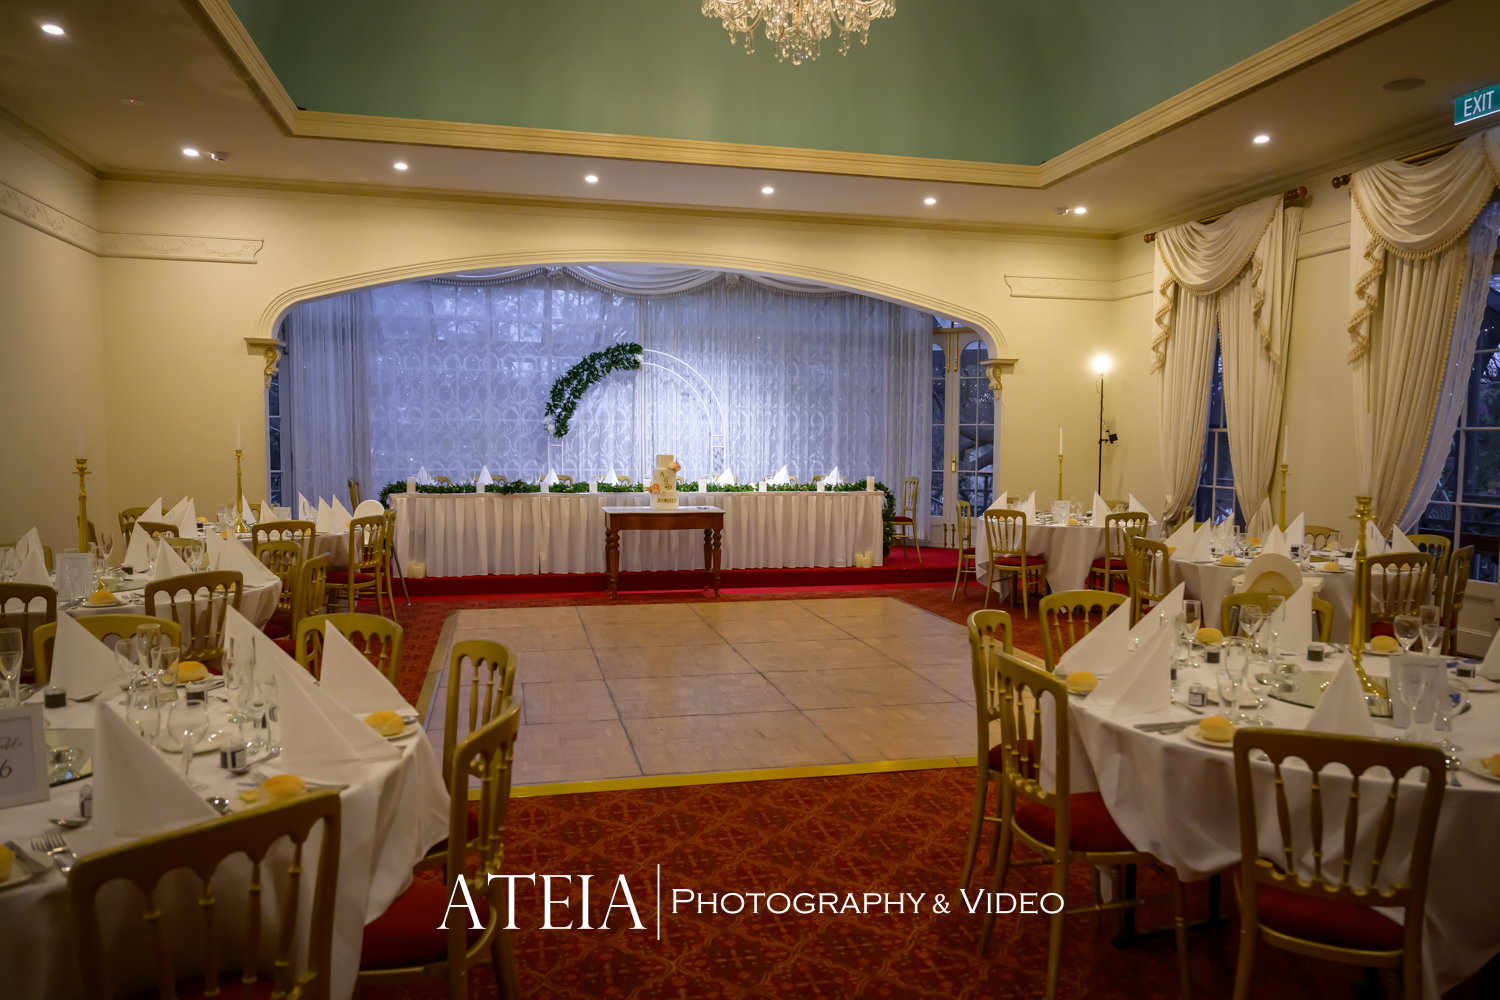 , Bujare and Alessandro&#8217;s wedding at Overnewton Castle captured by ATEIA Photography &#038; Video